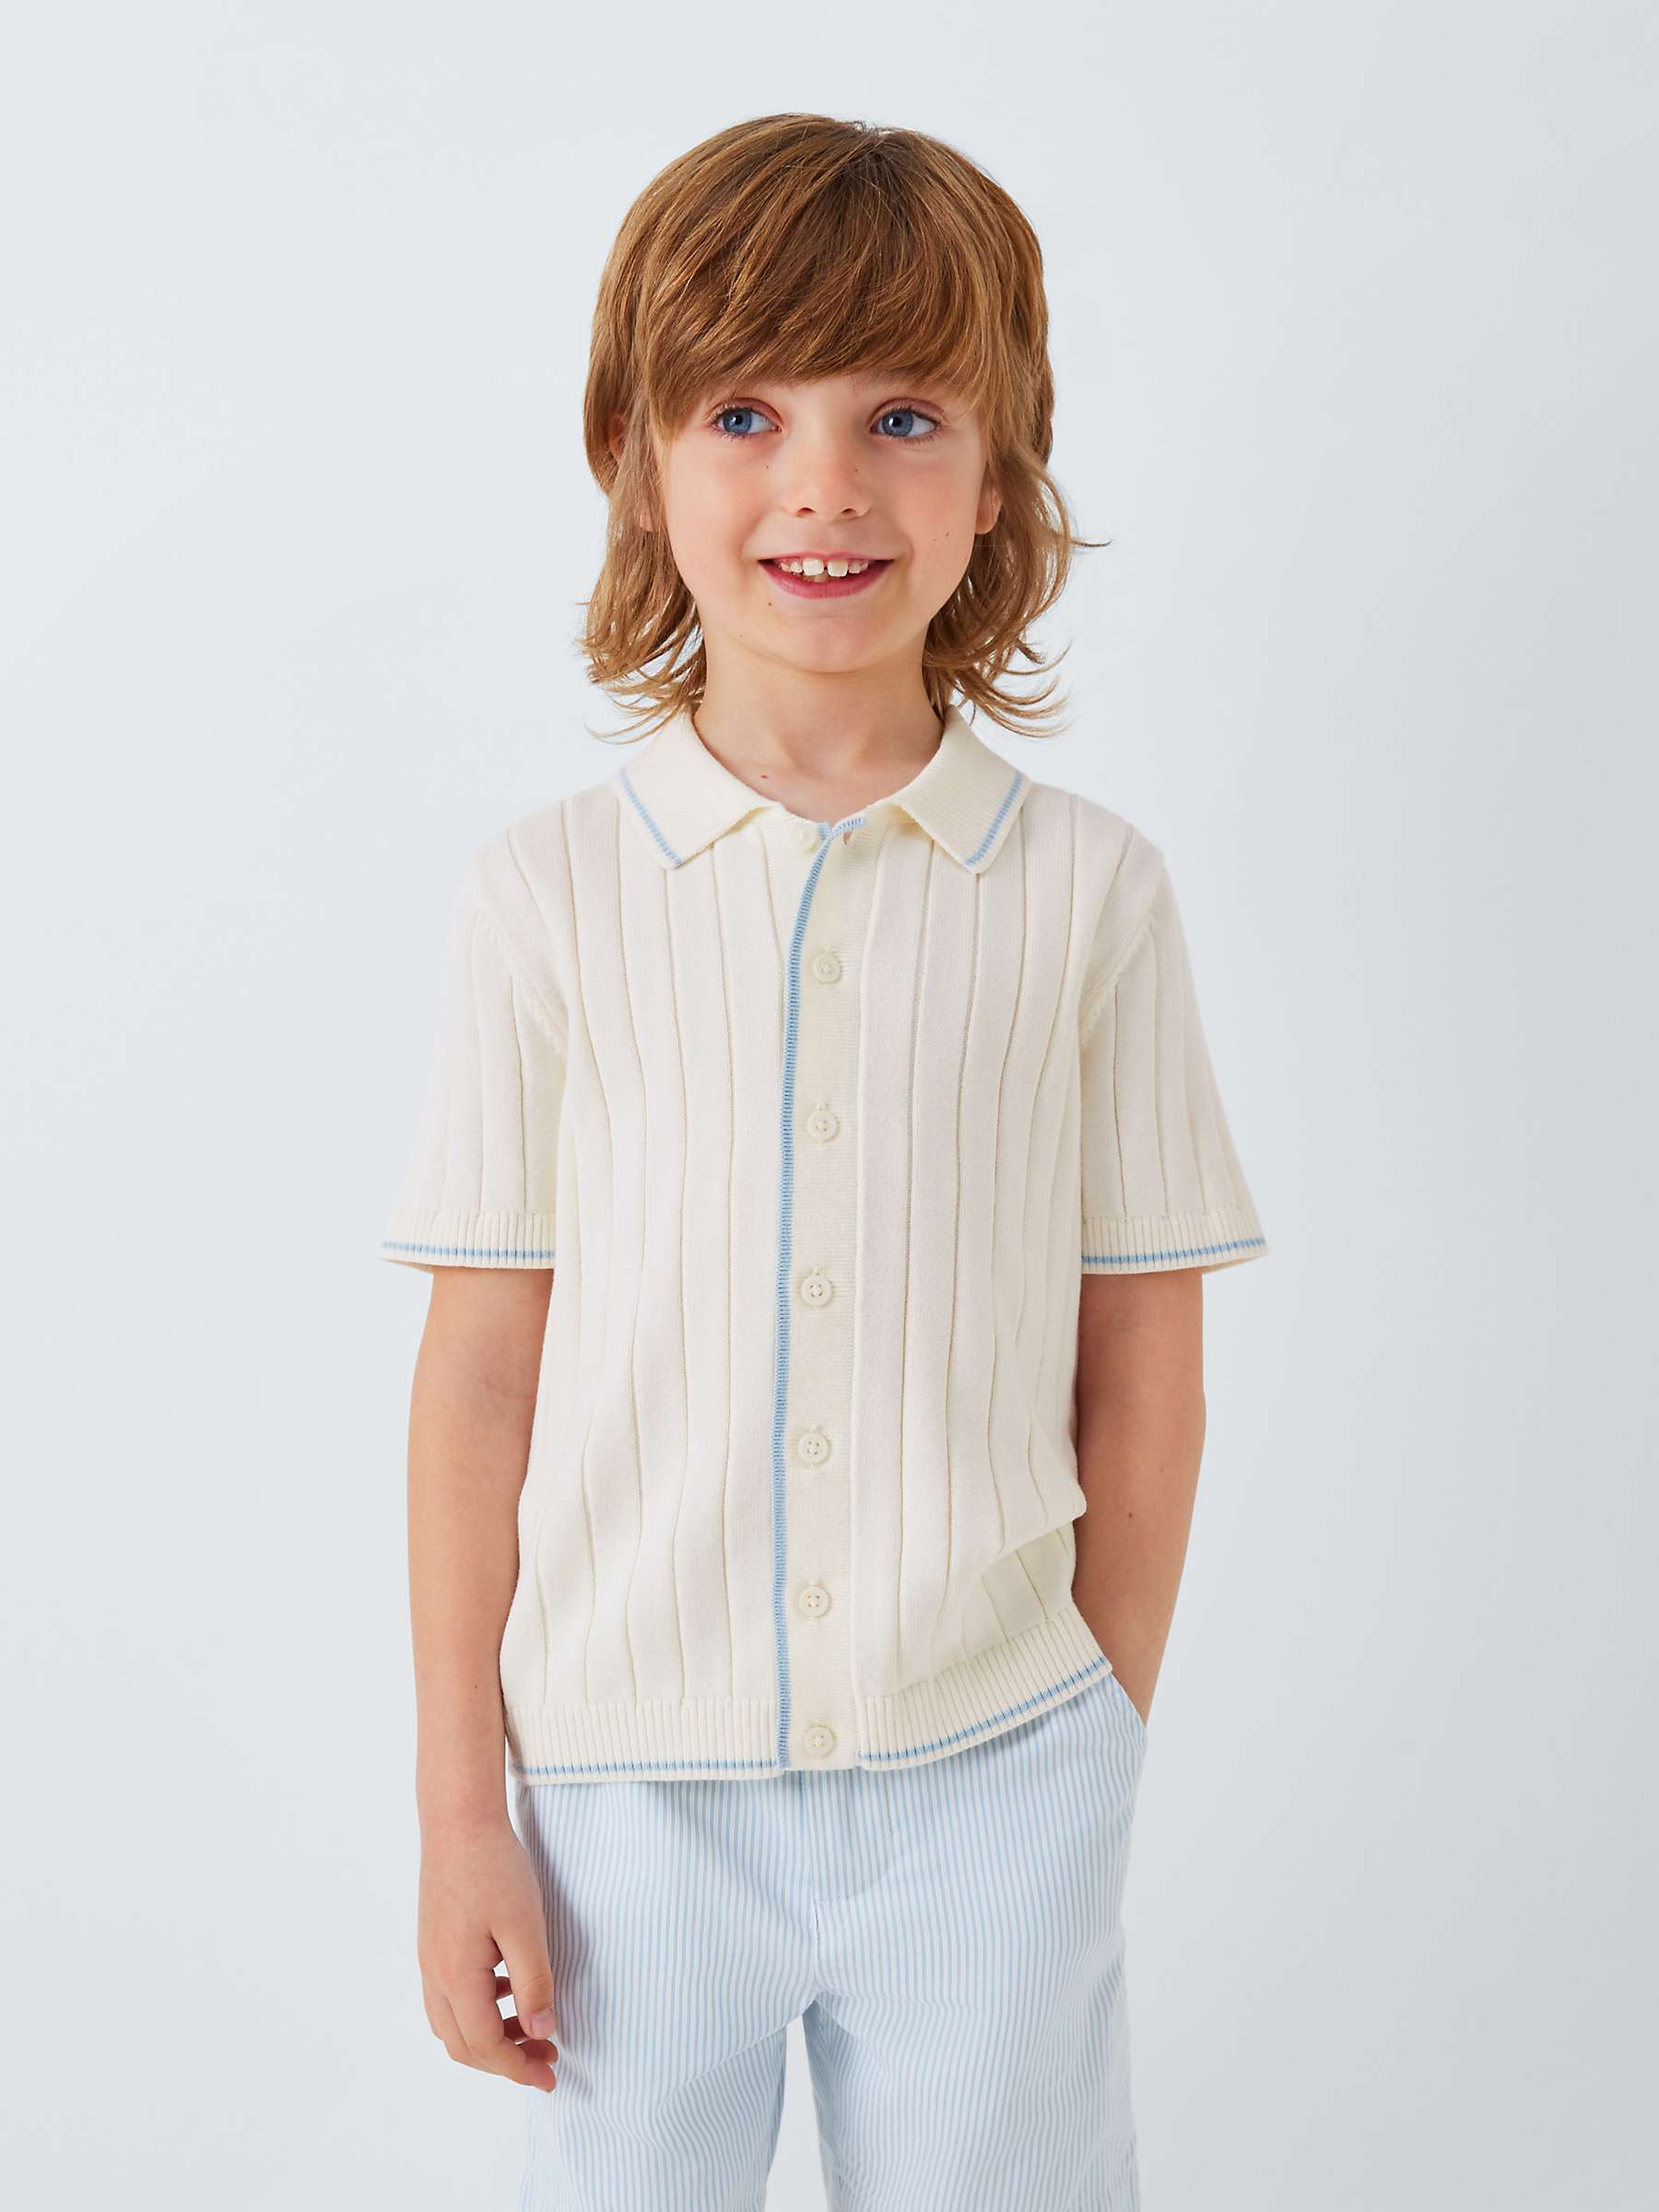 Buy John Lewis Heirloom Collection Kids' Knitted Polo Shirt, Cream Online at johnlewis.com